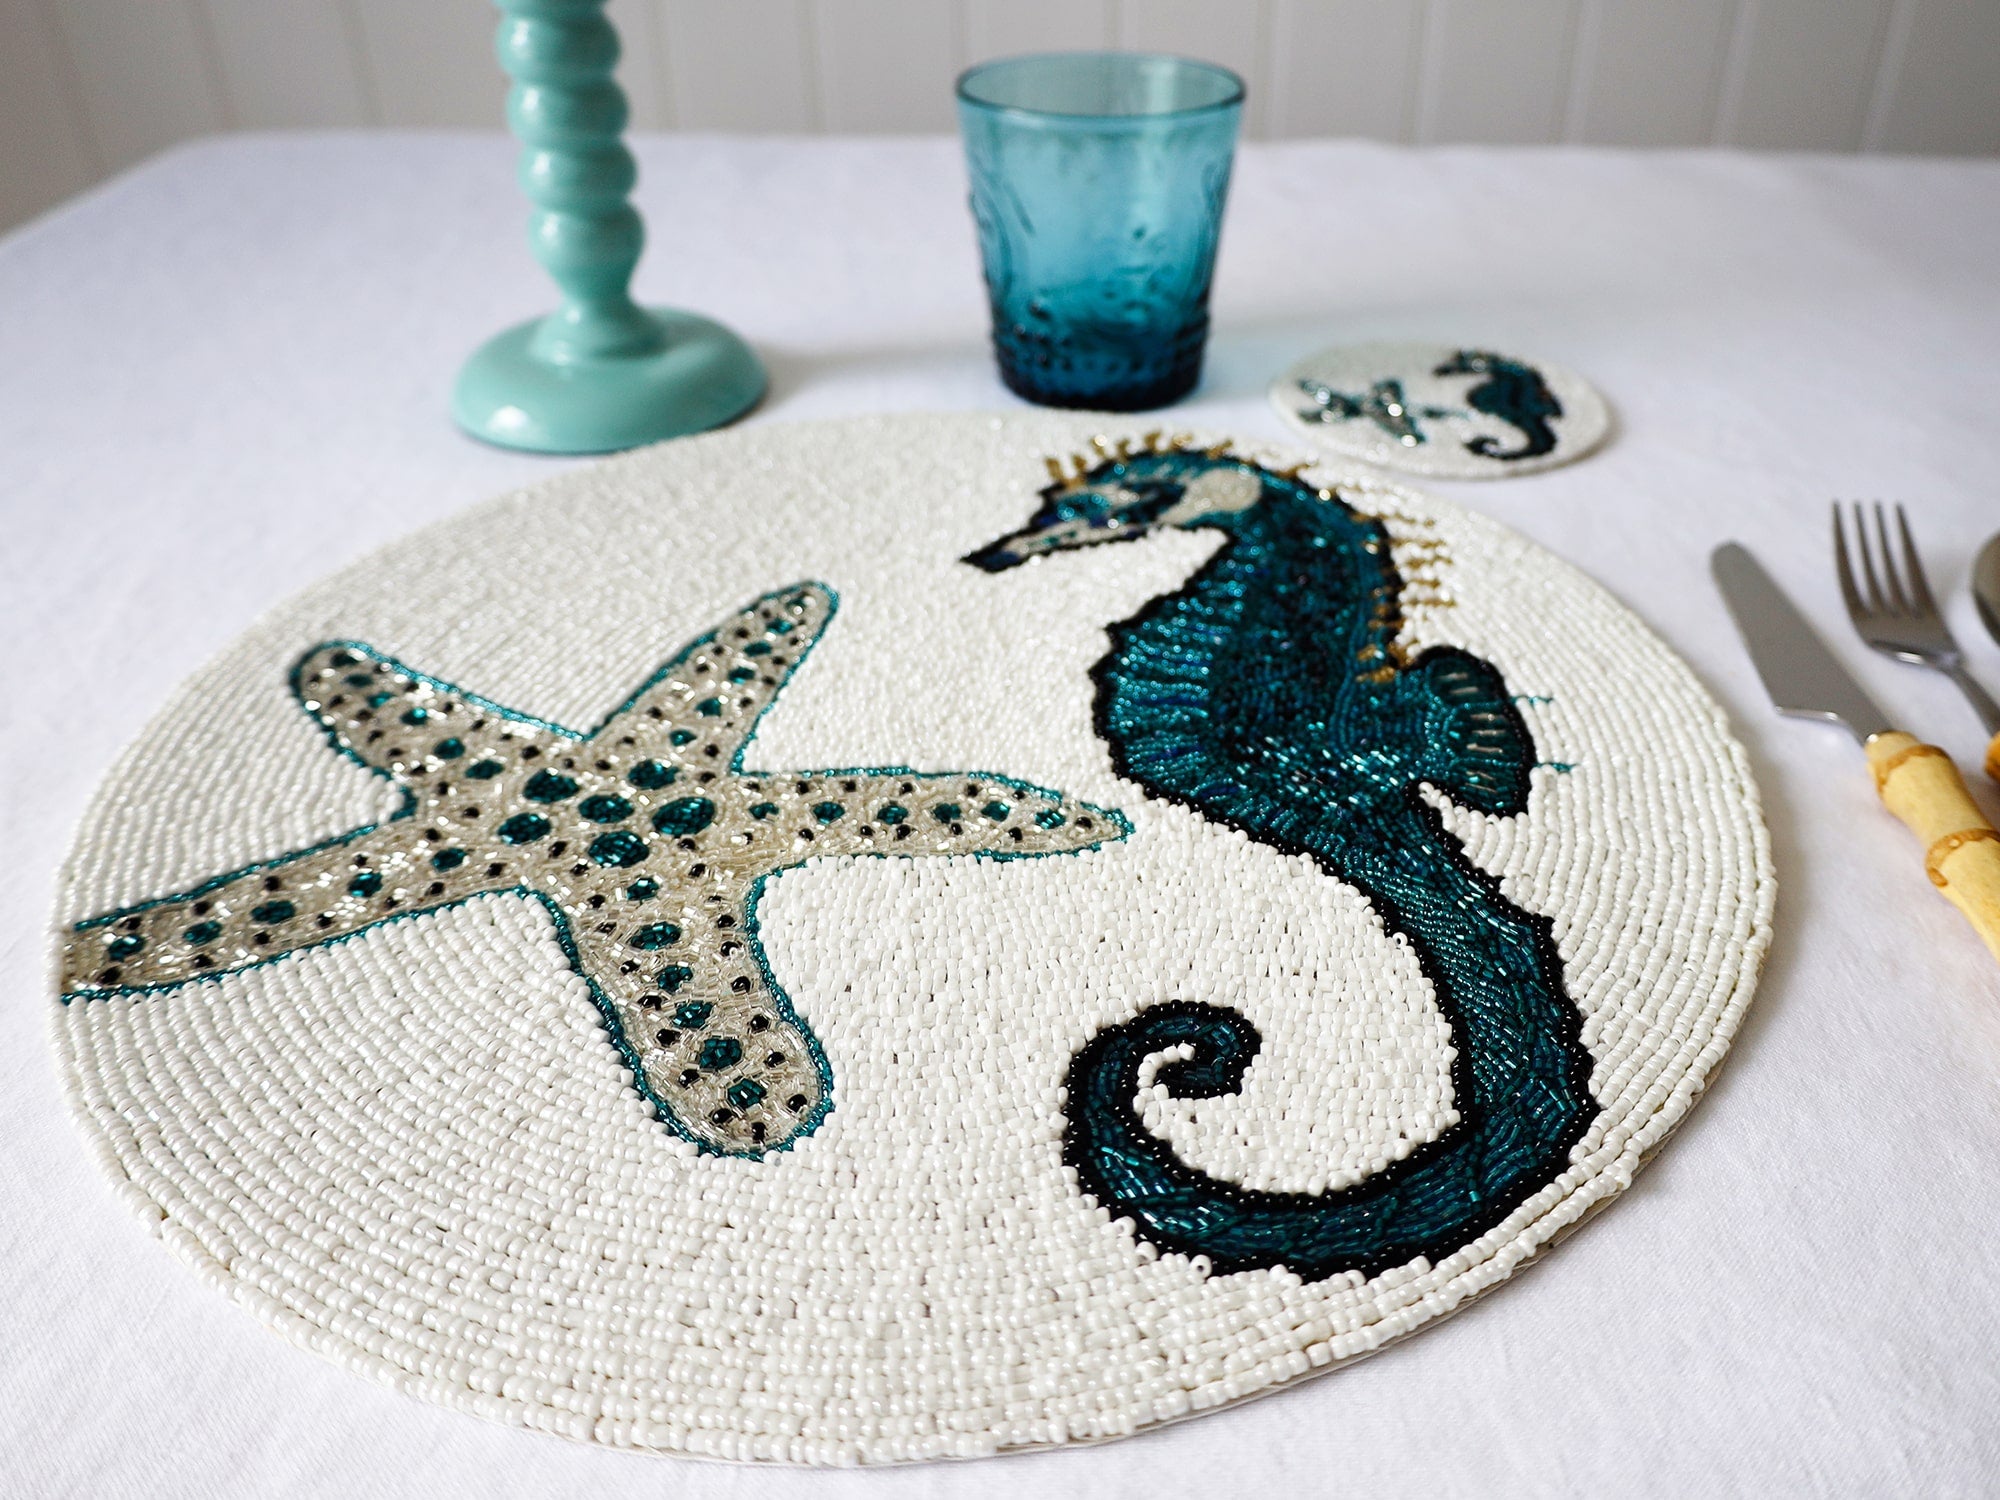 Handmade glass beaded placemat with a Seahorse and Starfish design in Navy,Black and gold on white glass beads in a place setting with cutlery,a glass and a candlestick